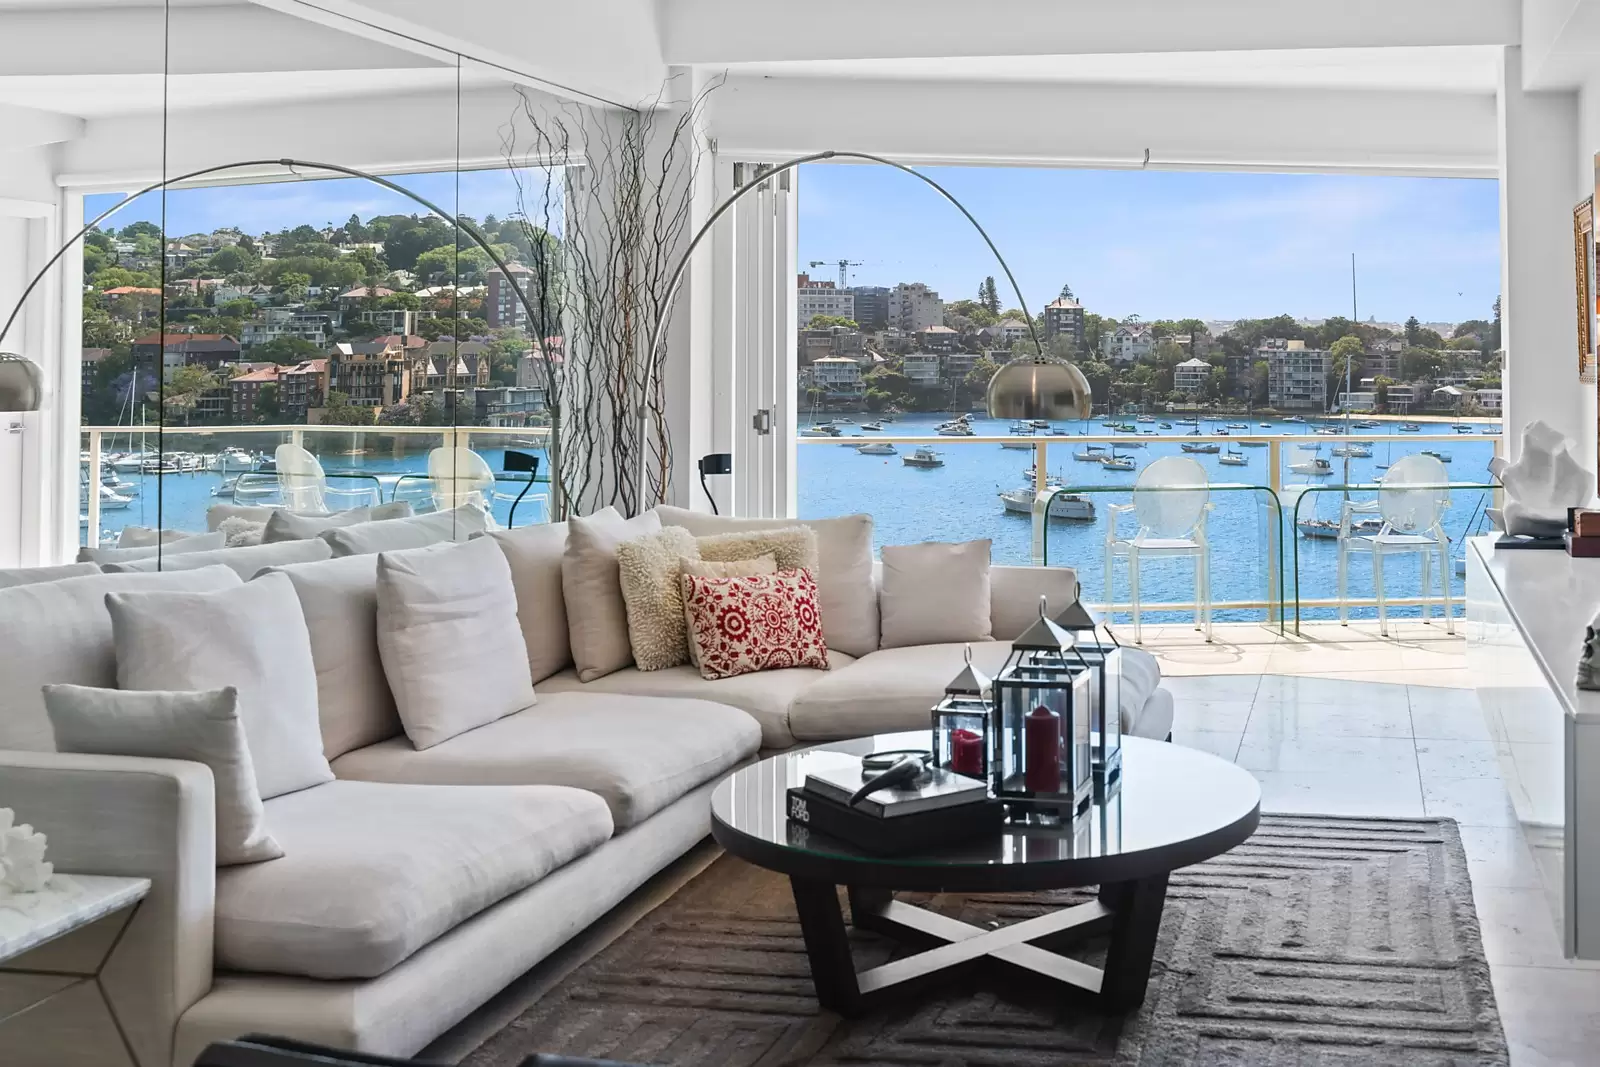 Photo #3: 81/11 Sutherland Crescent, Darling Point - Sold by Sydney Sotheby's International Realty